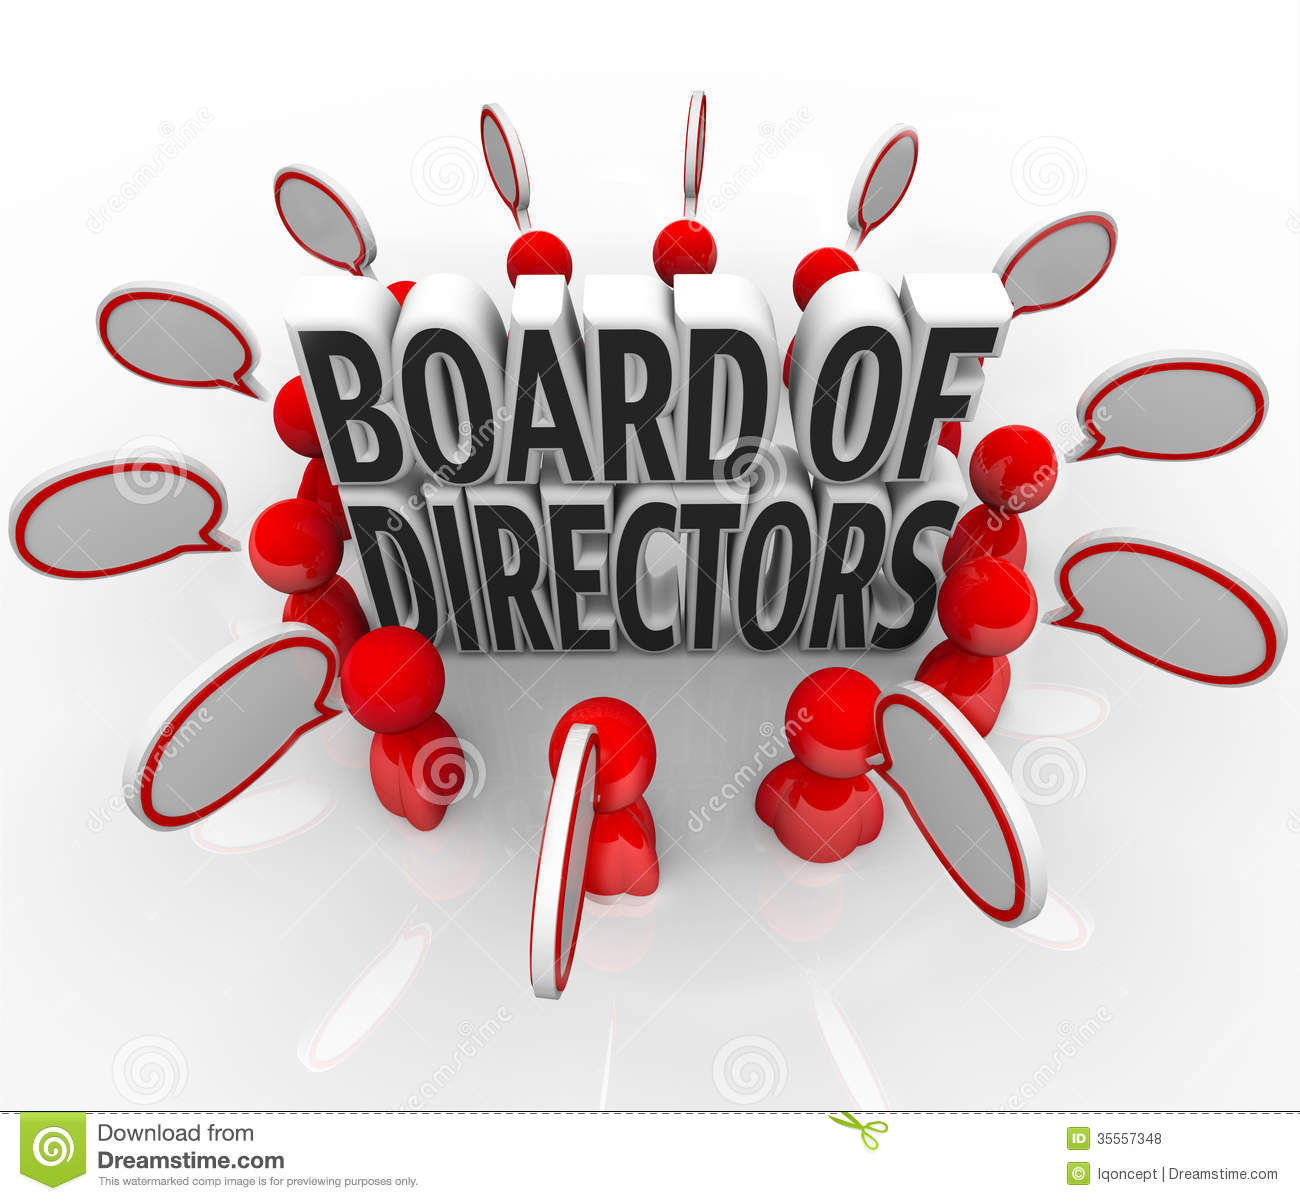 Board Of Directors People Meeting With Speech Bubbles In A Discussion